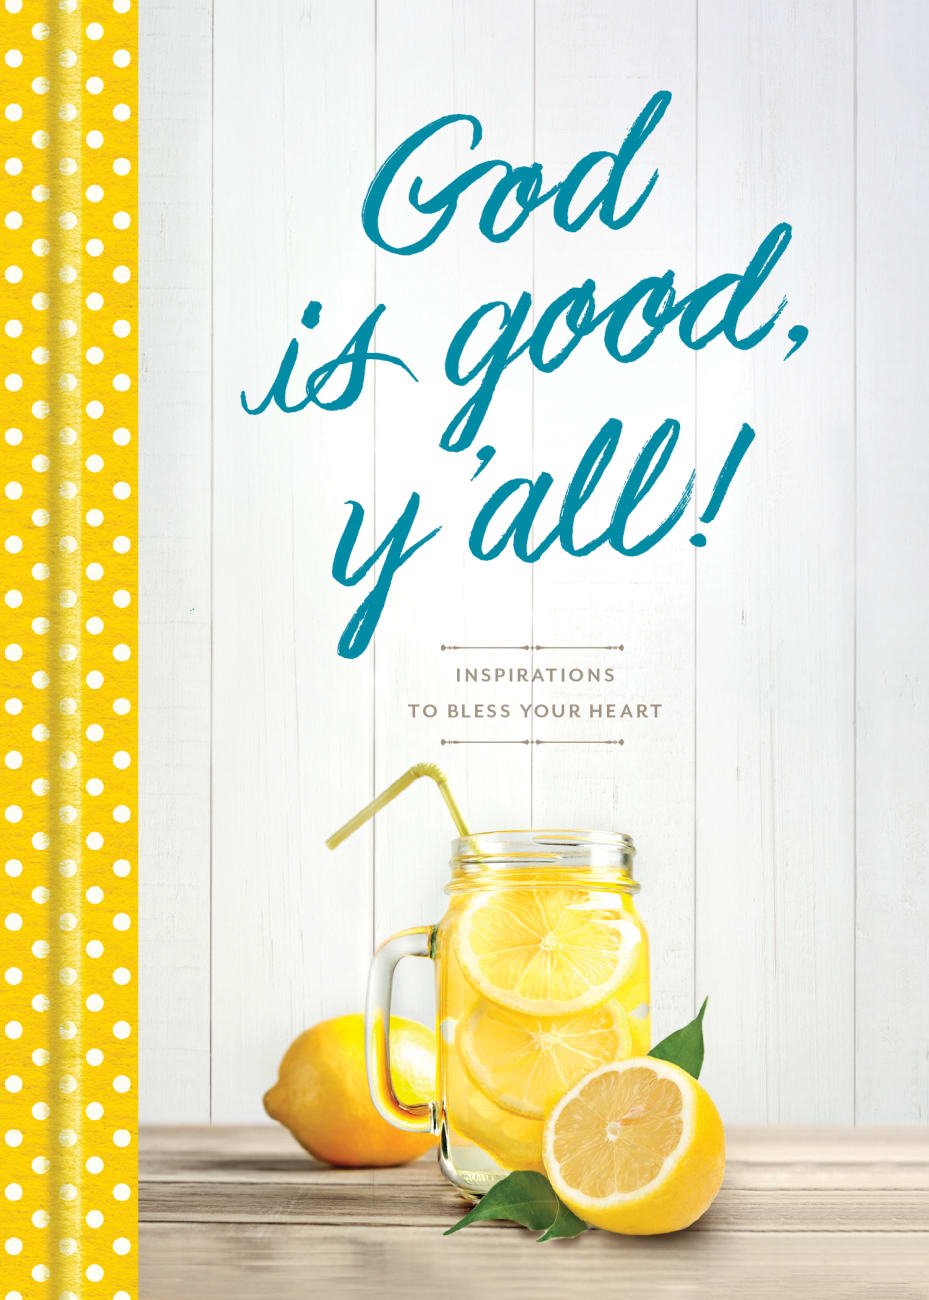 God is Good, Y'all!: Inspirations to Bless Your Heart Hardback